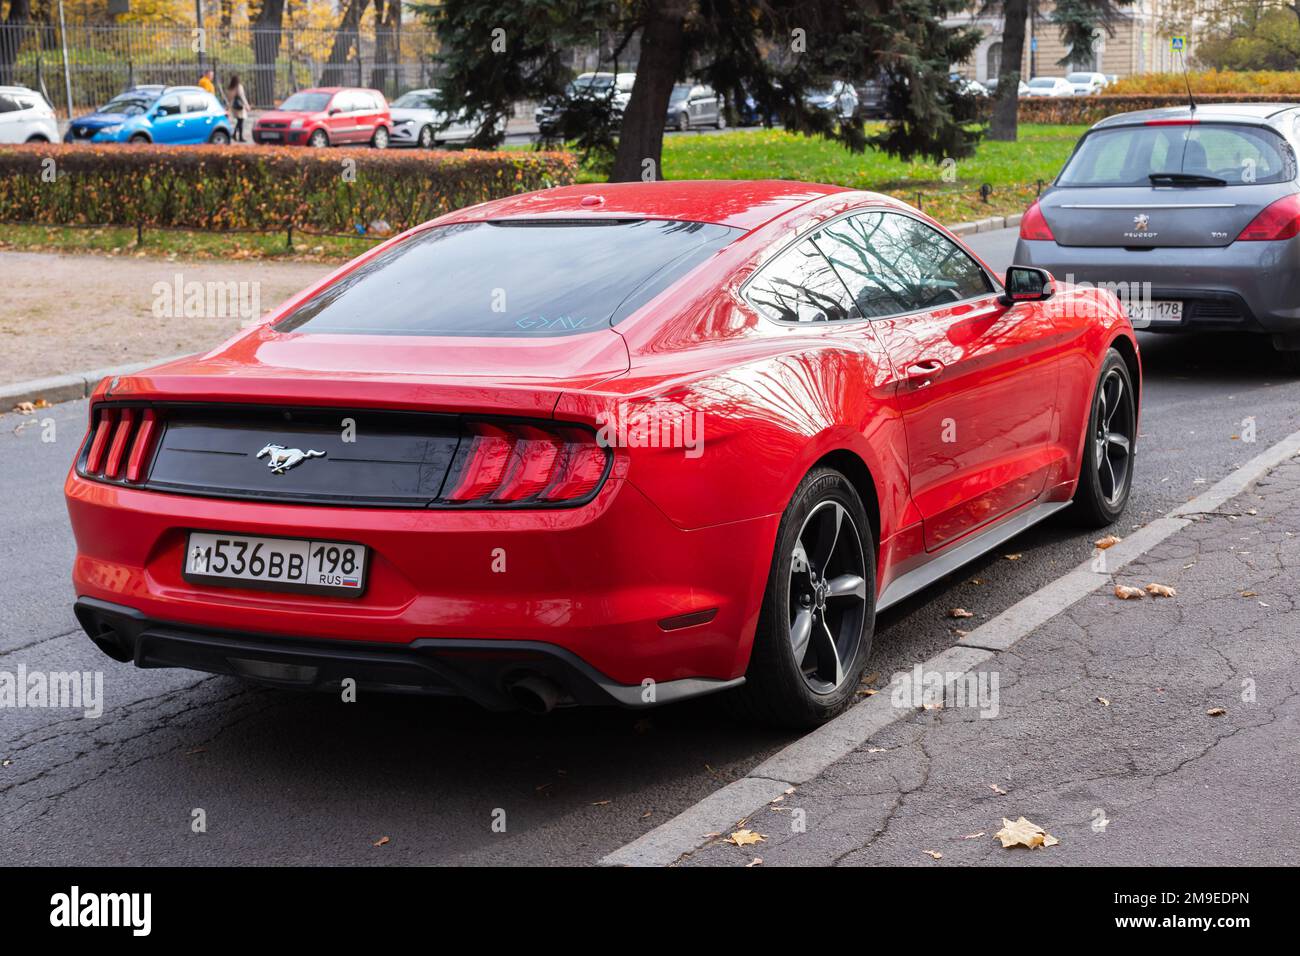 St-Petersburg, Russia - October 7, 2021: Rear view of the sixth generation Ford Mustang GT, red sporty coupe car stands parked on the street Stock Photo